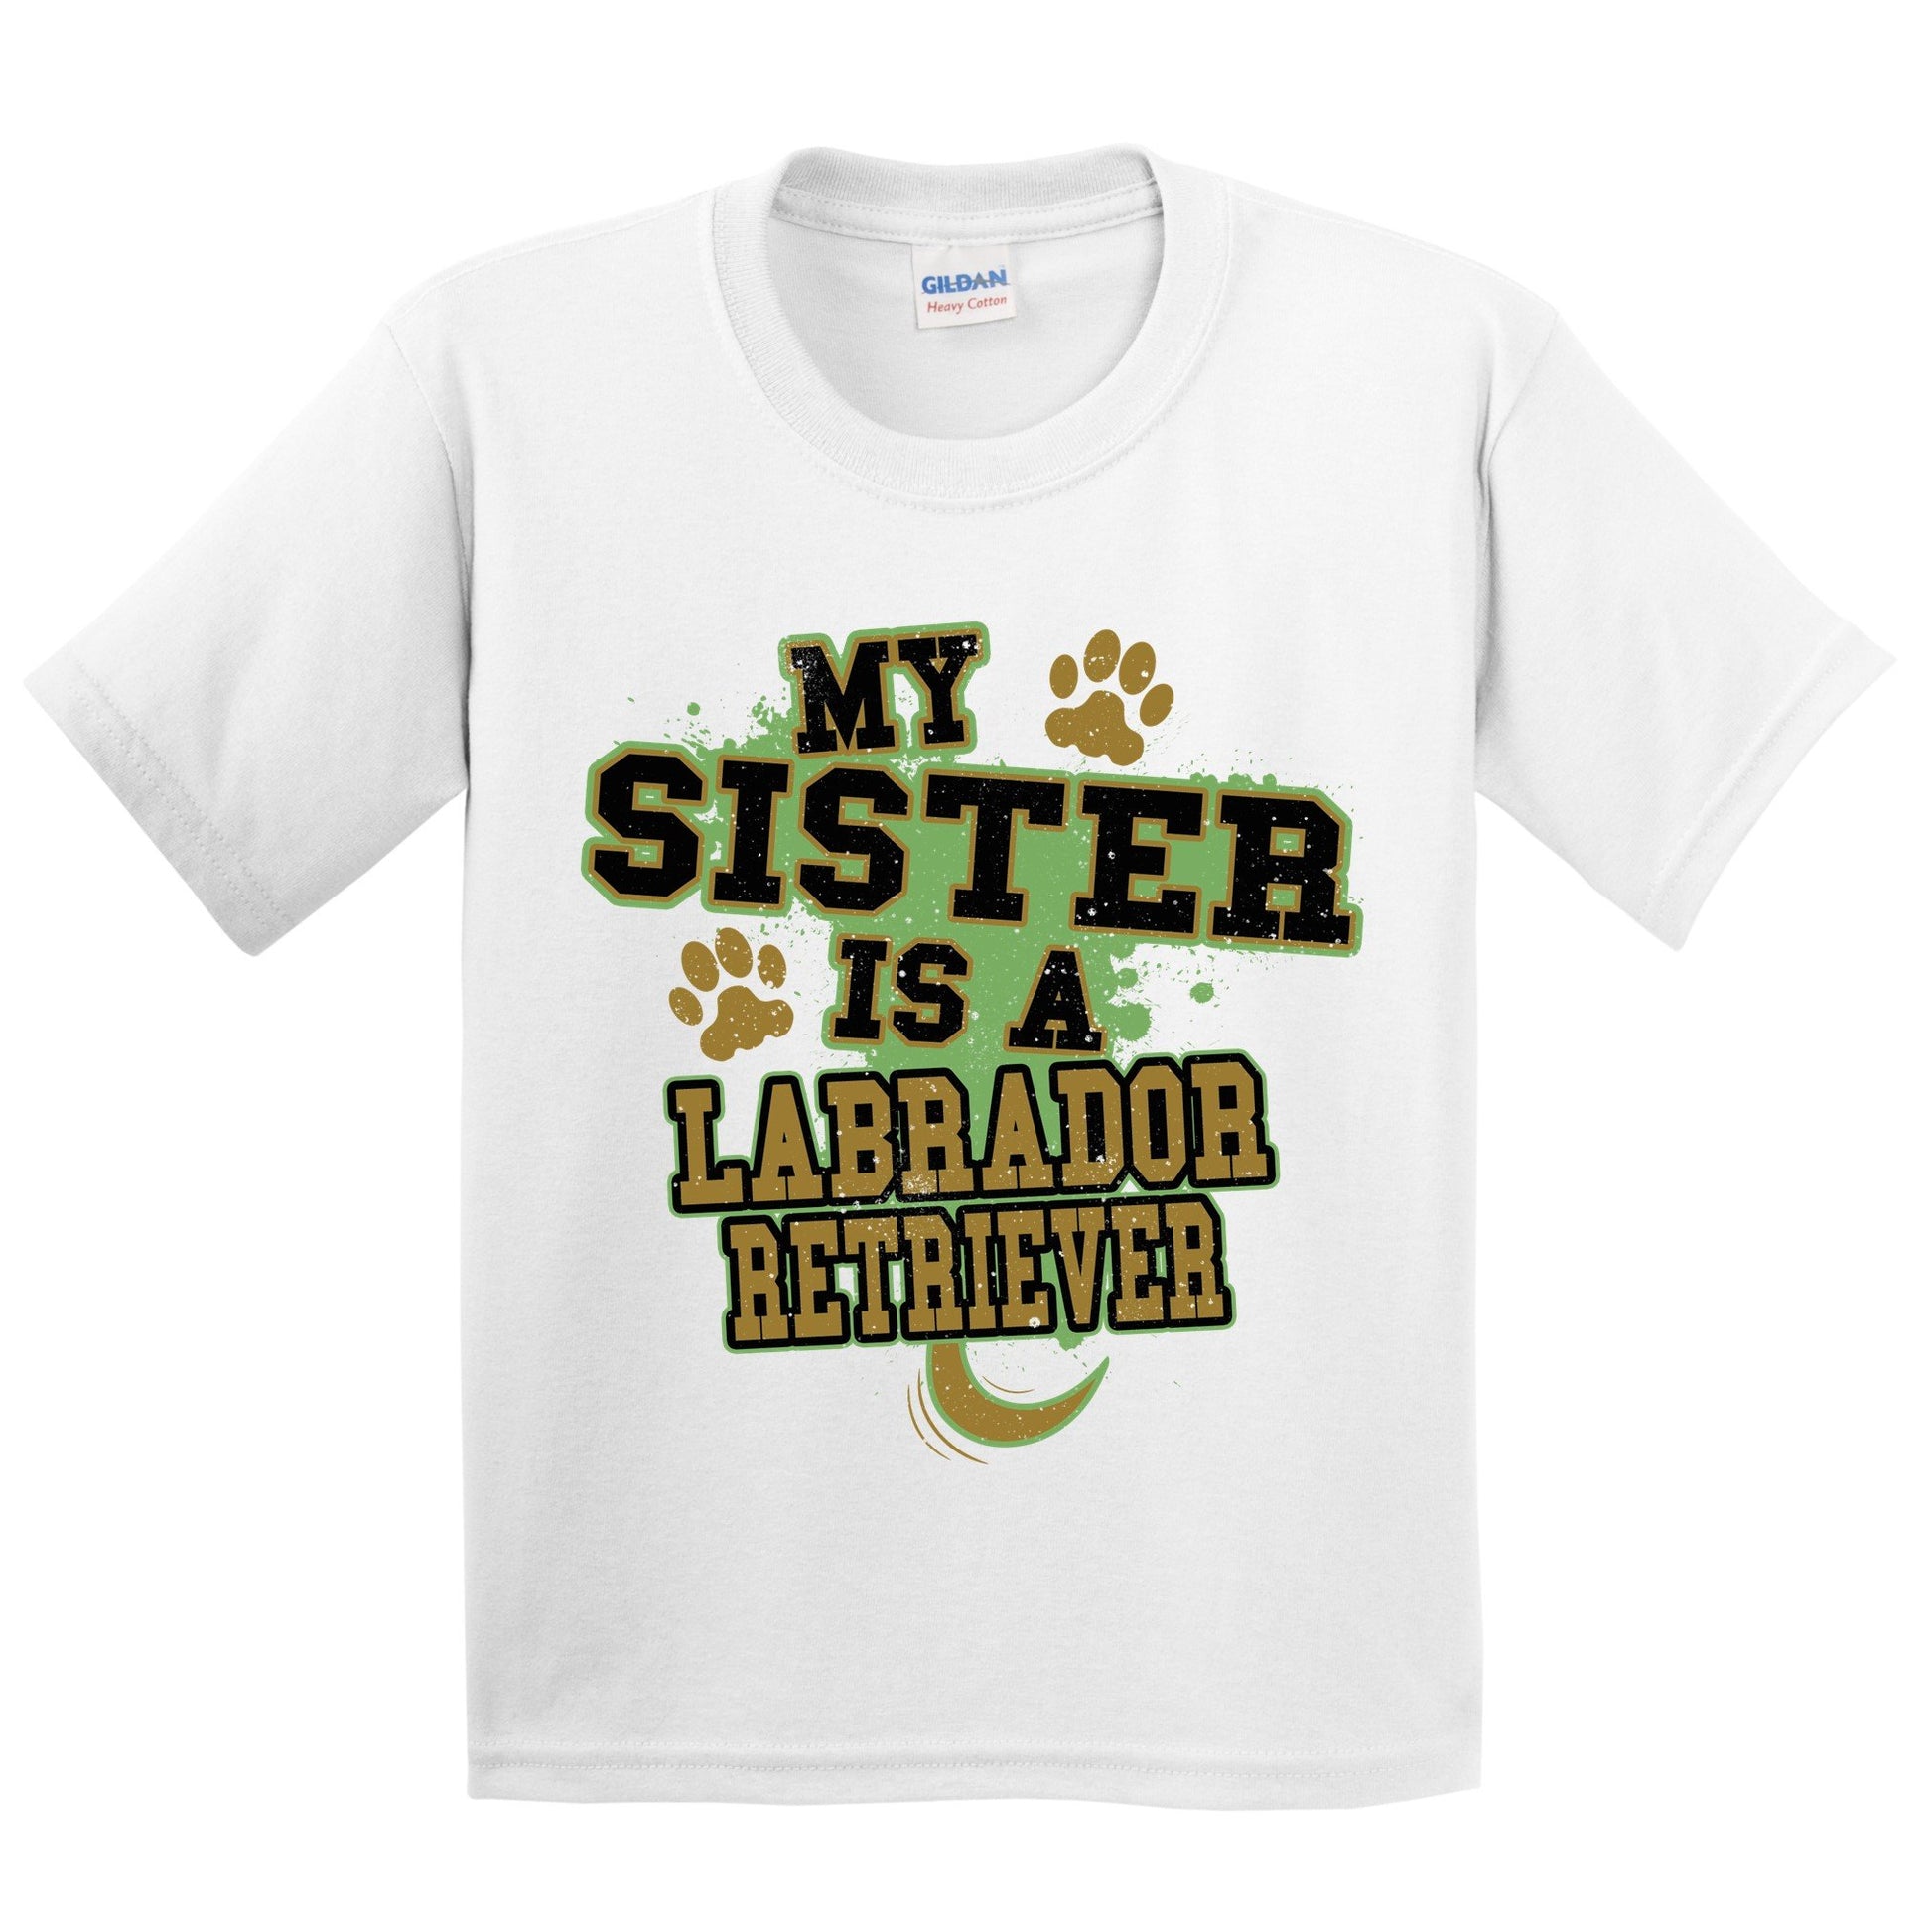 My Sister Is A Labrador Retriever Funny Dog Kids Youth T-Shirt